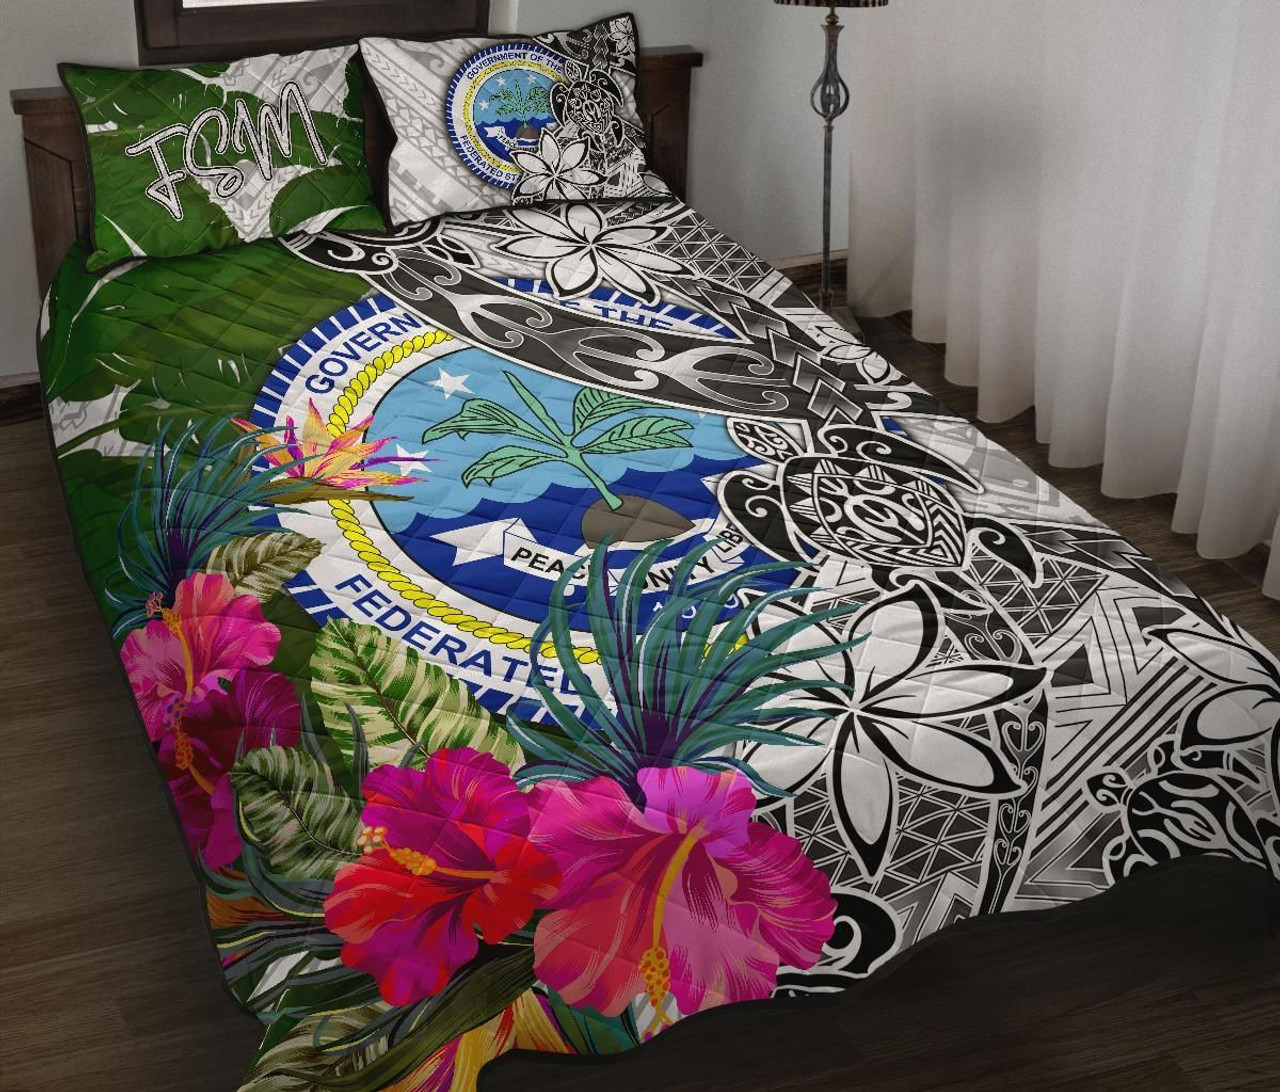 Federated States of Micronesia Quilt Bed Set White - Turtle Plumeria Banana Leaf 1